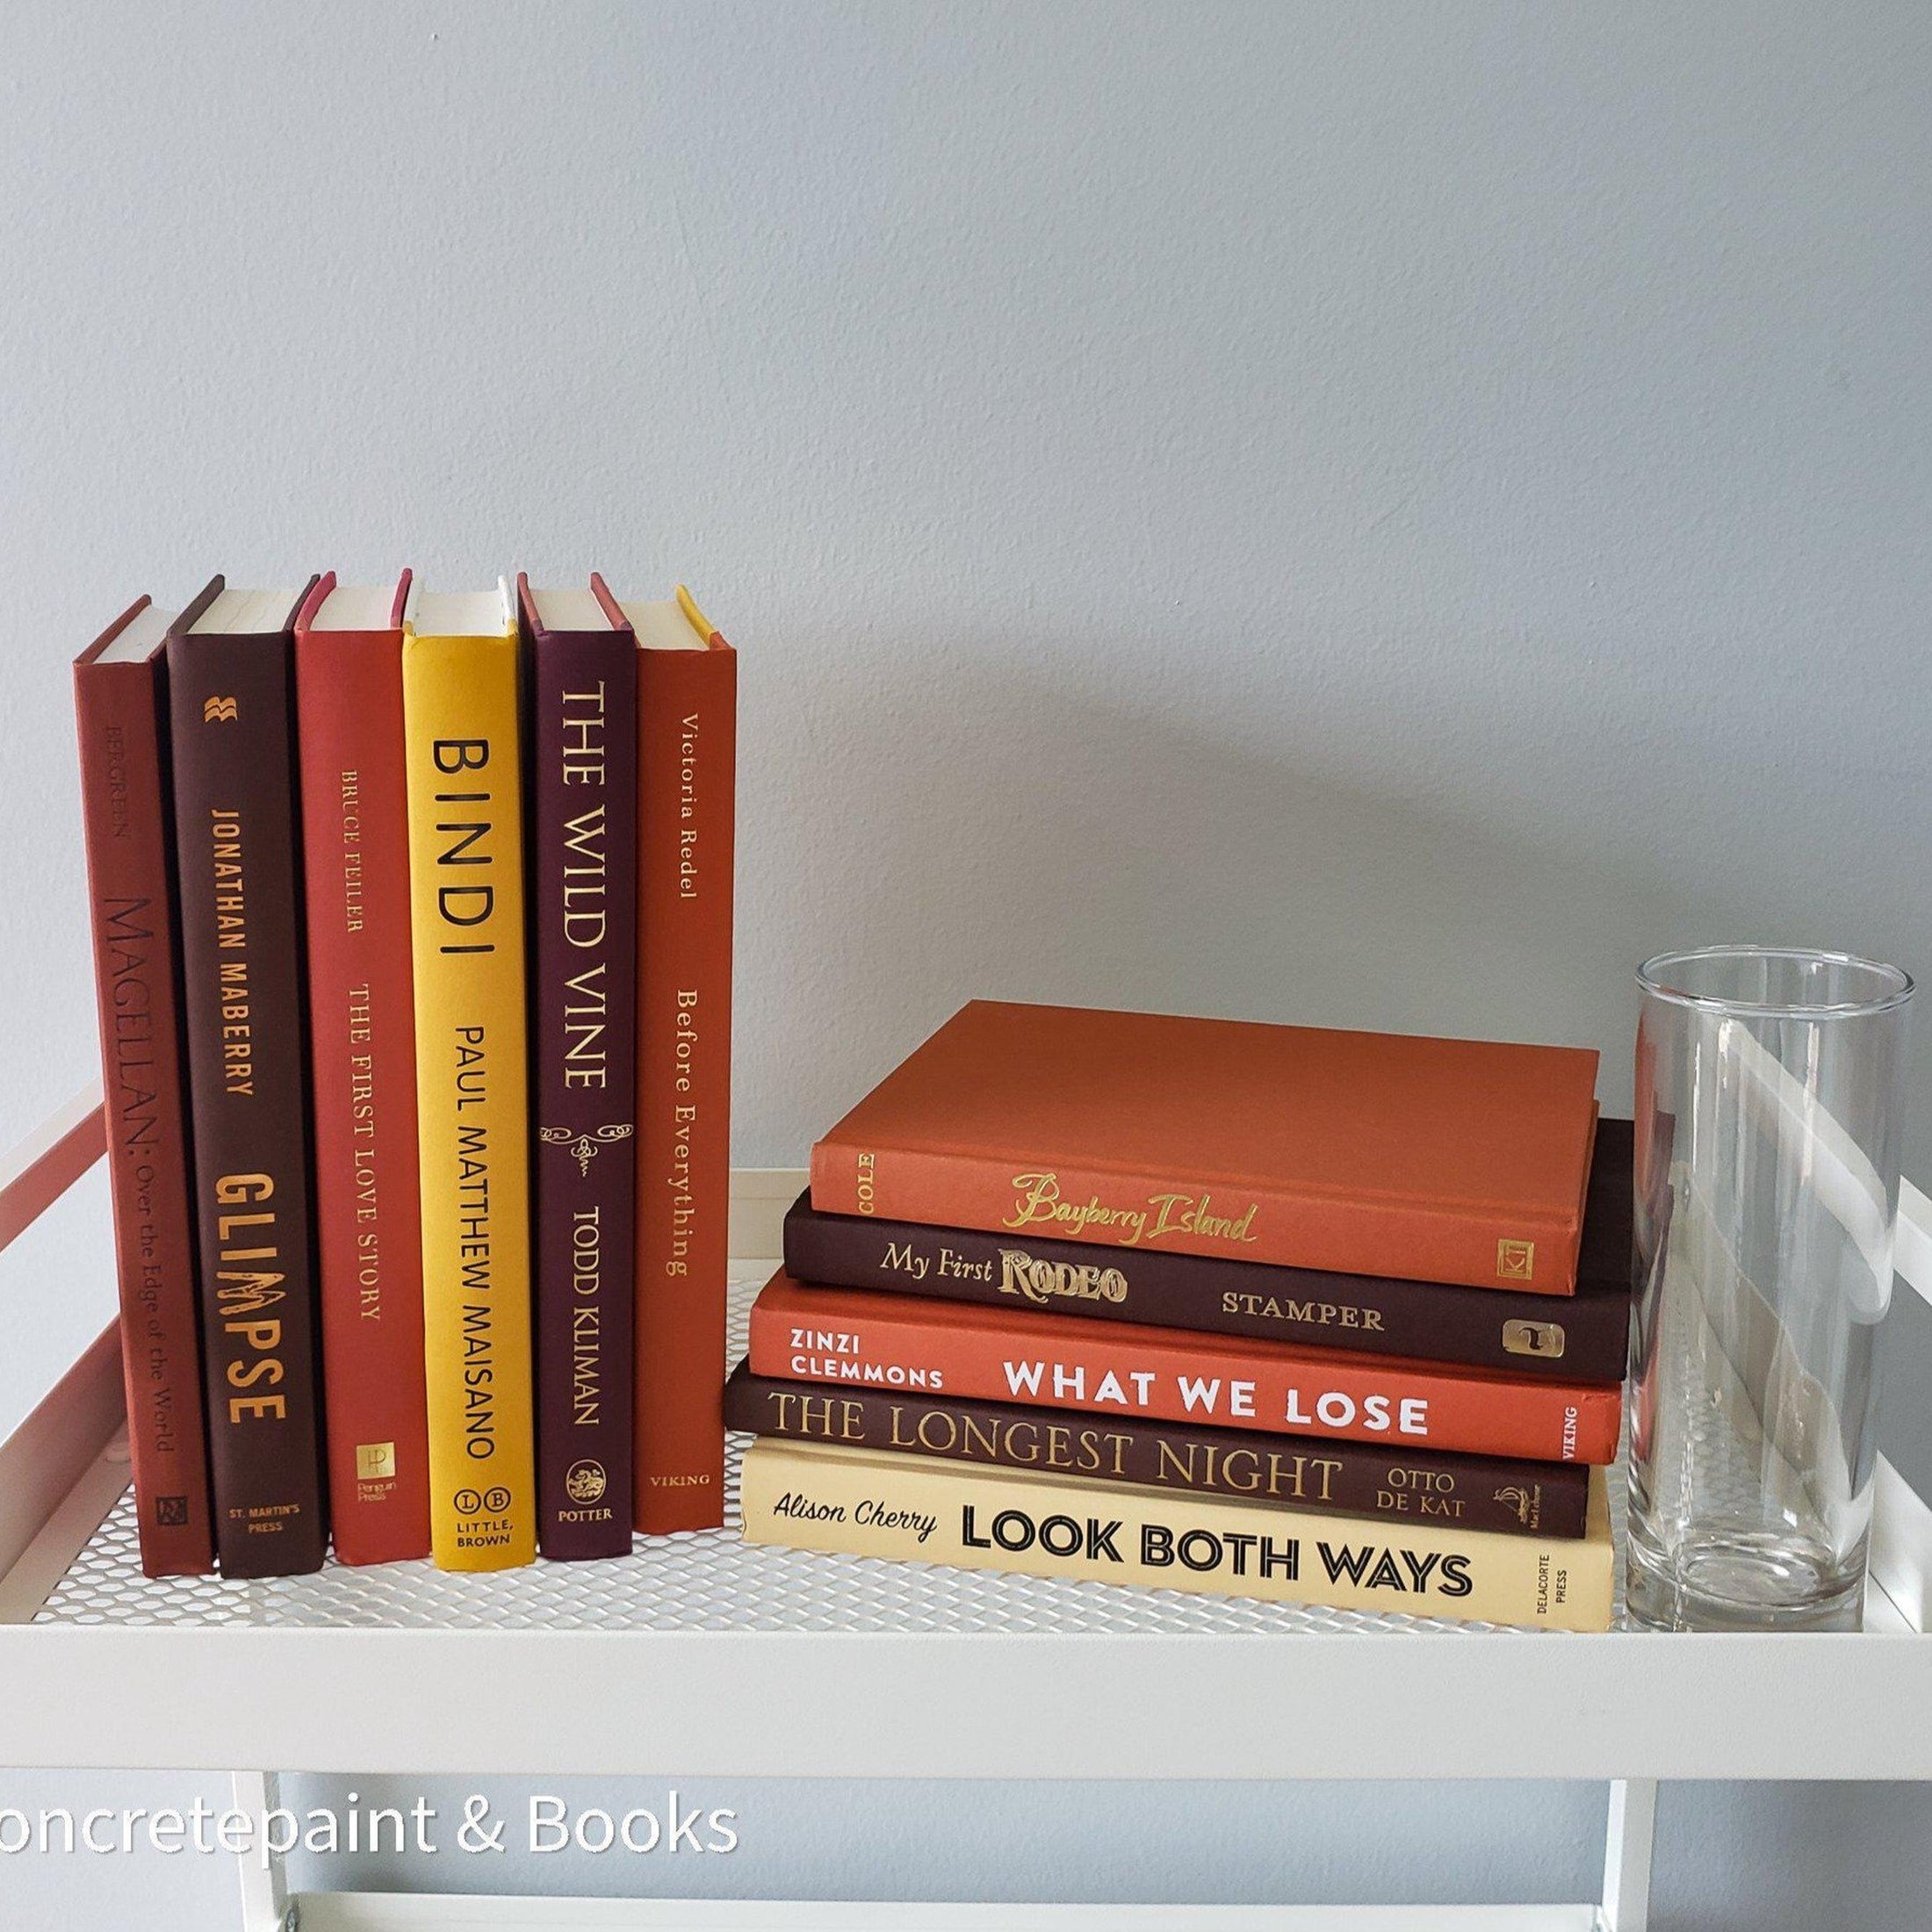 Yellow, orange, and brown books staged for display. Sets of rral hardcover books used for decorating.